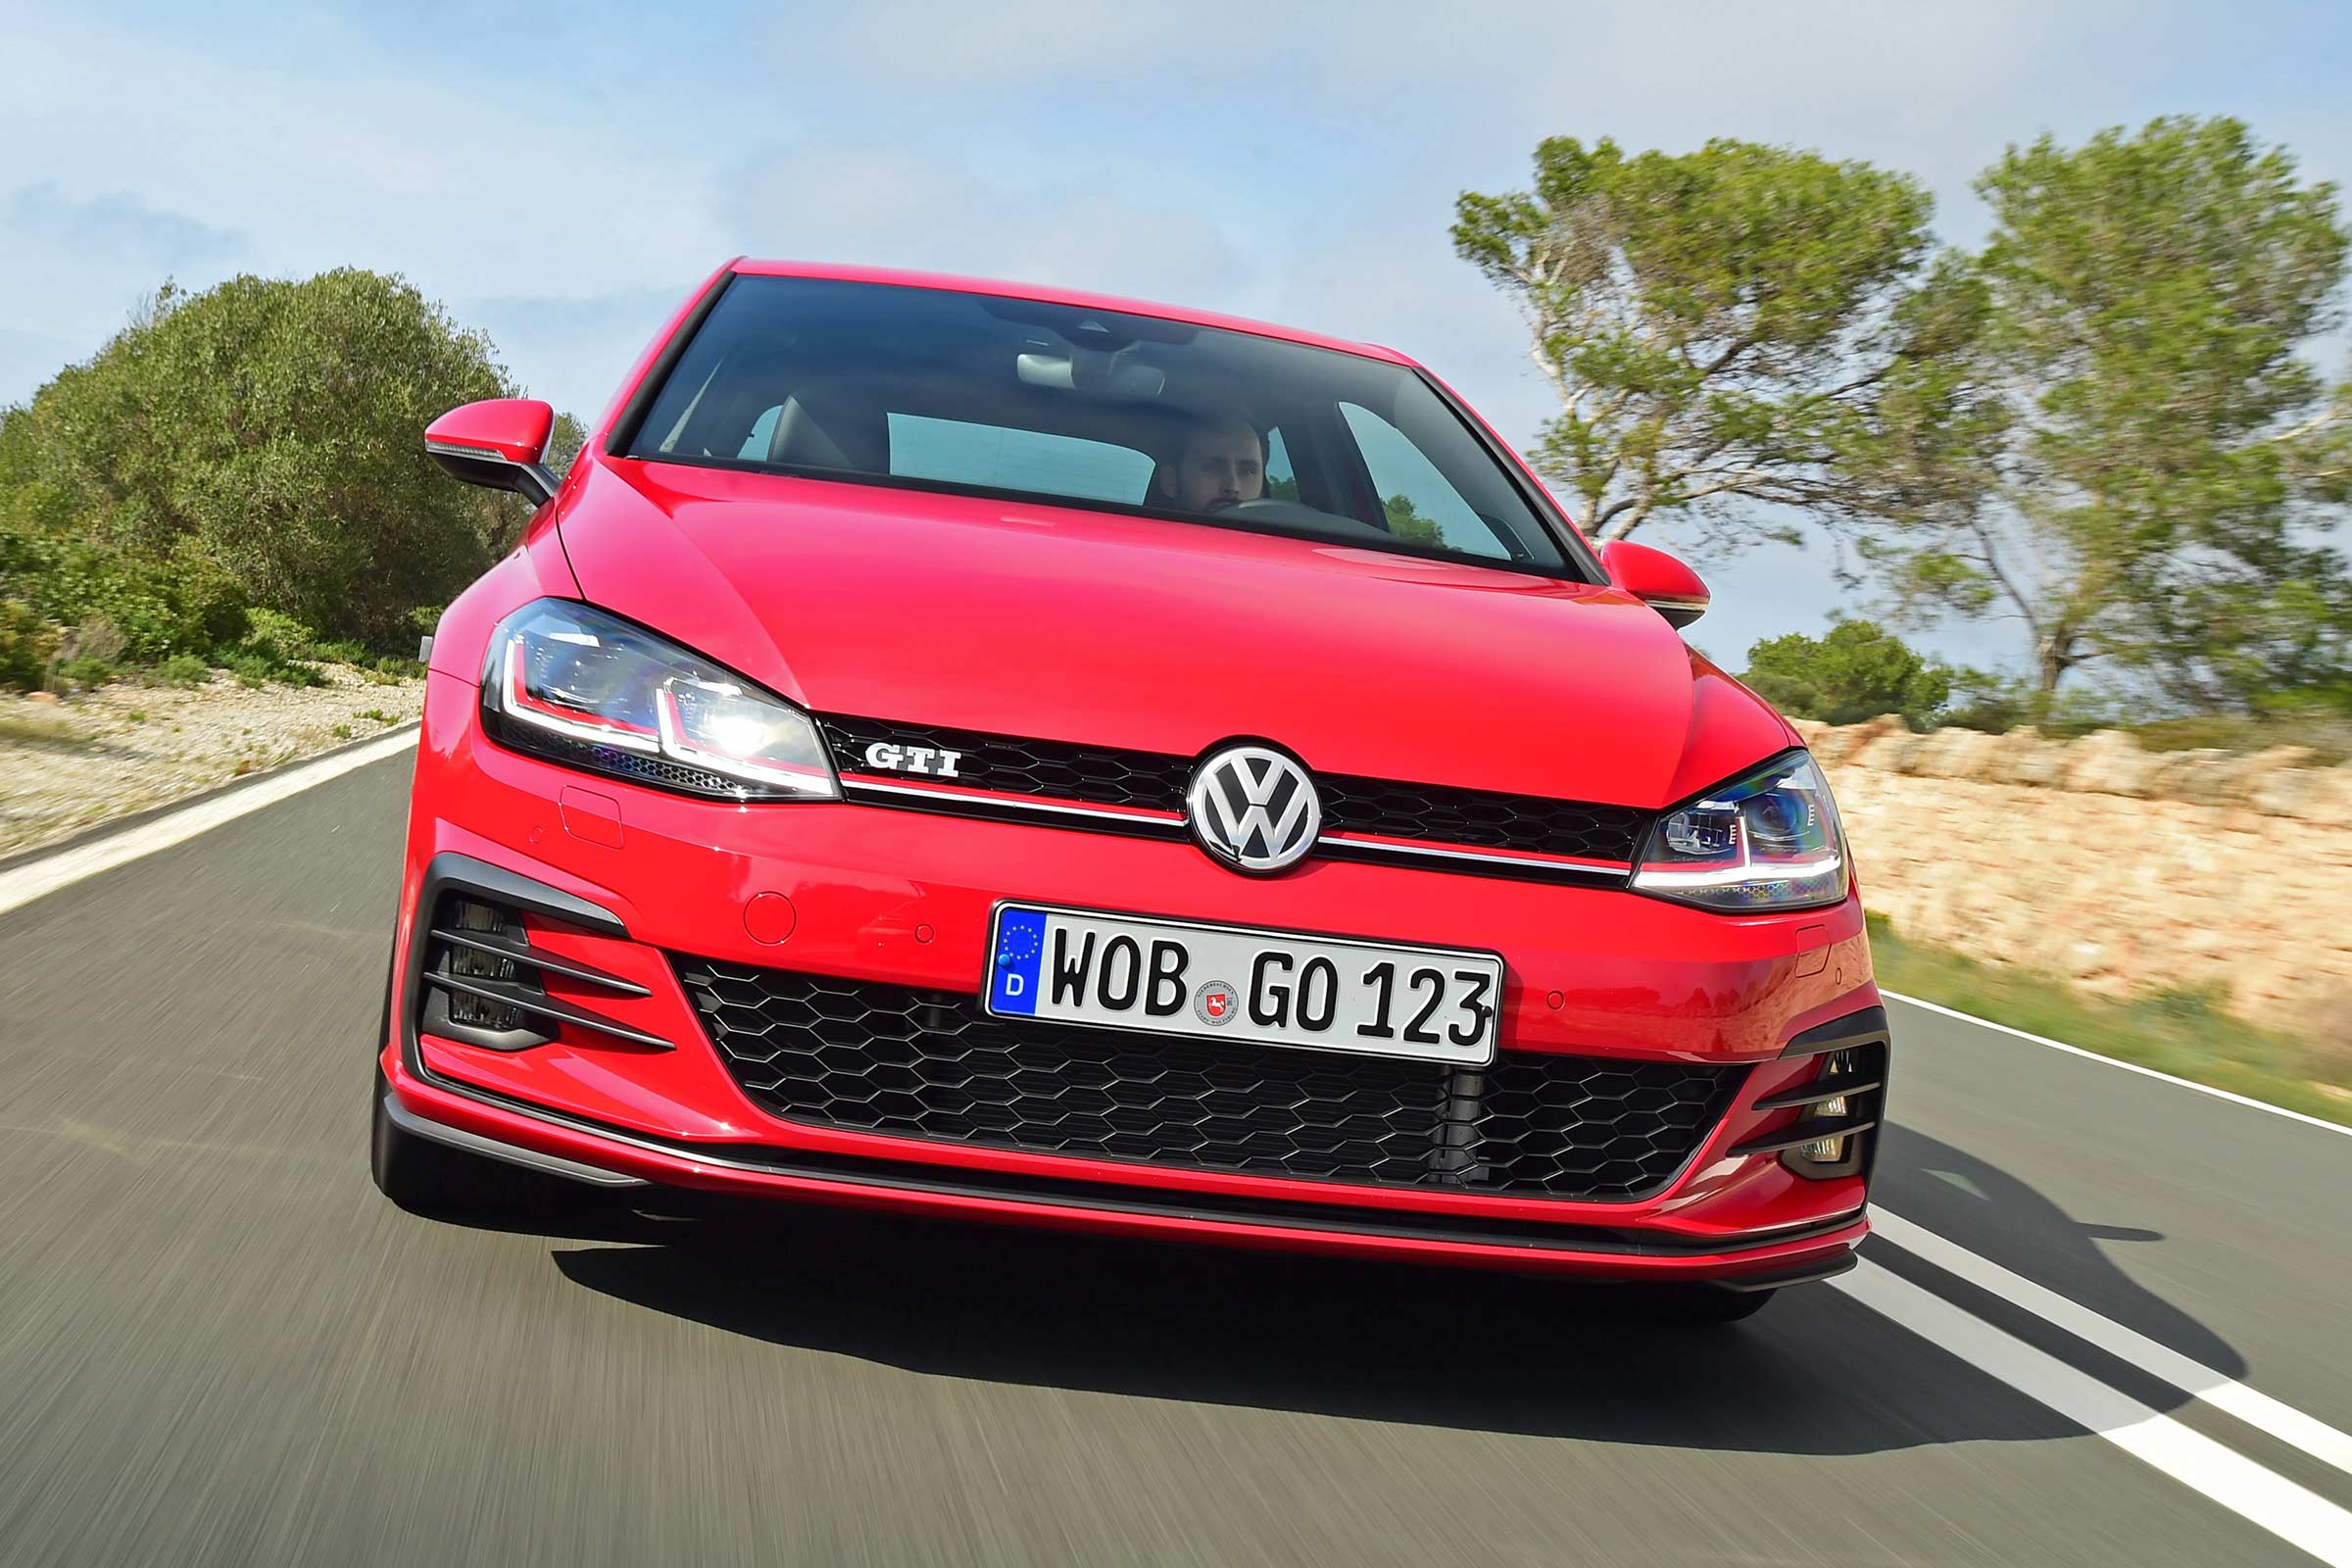 New Volkswagen Golf Gti Facelift 2017 Review Auto Express